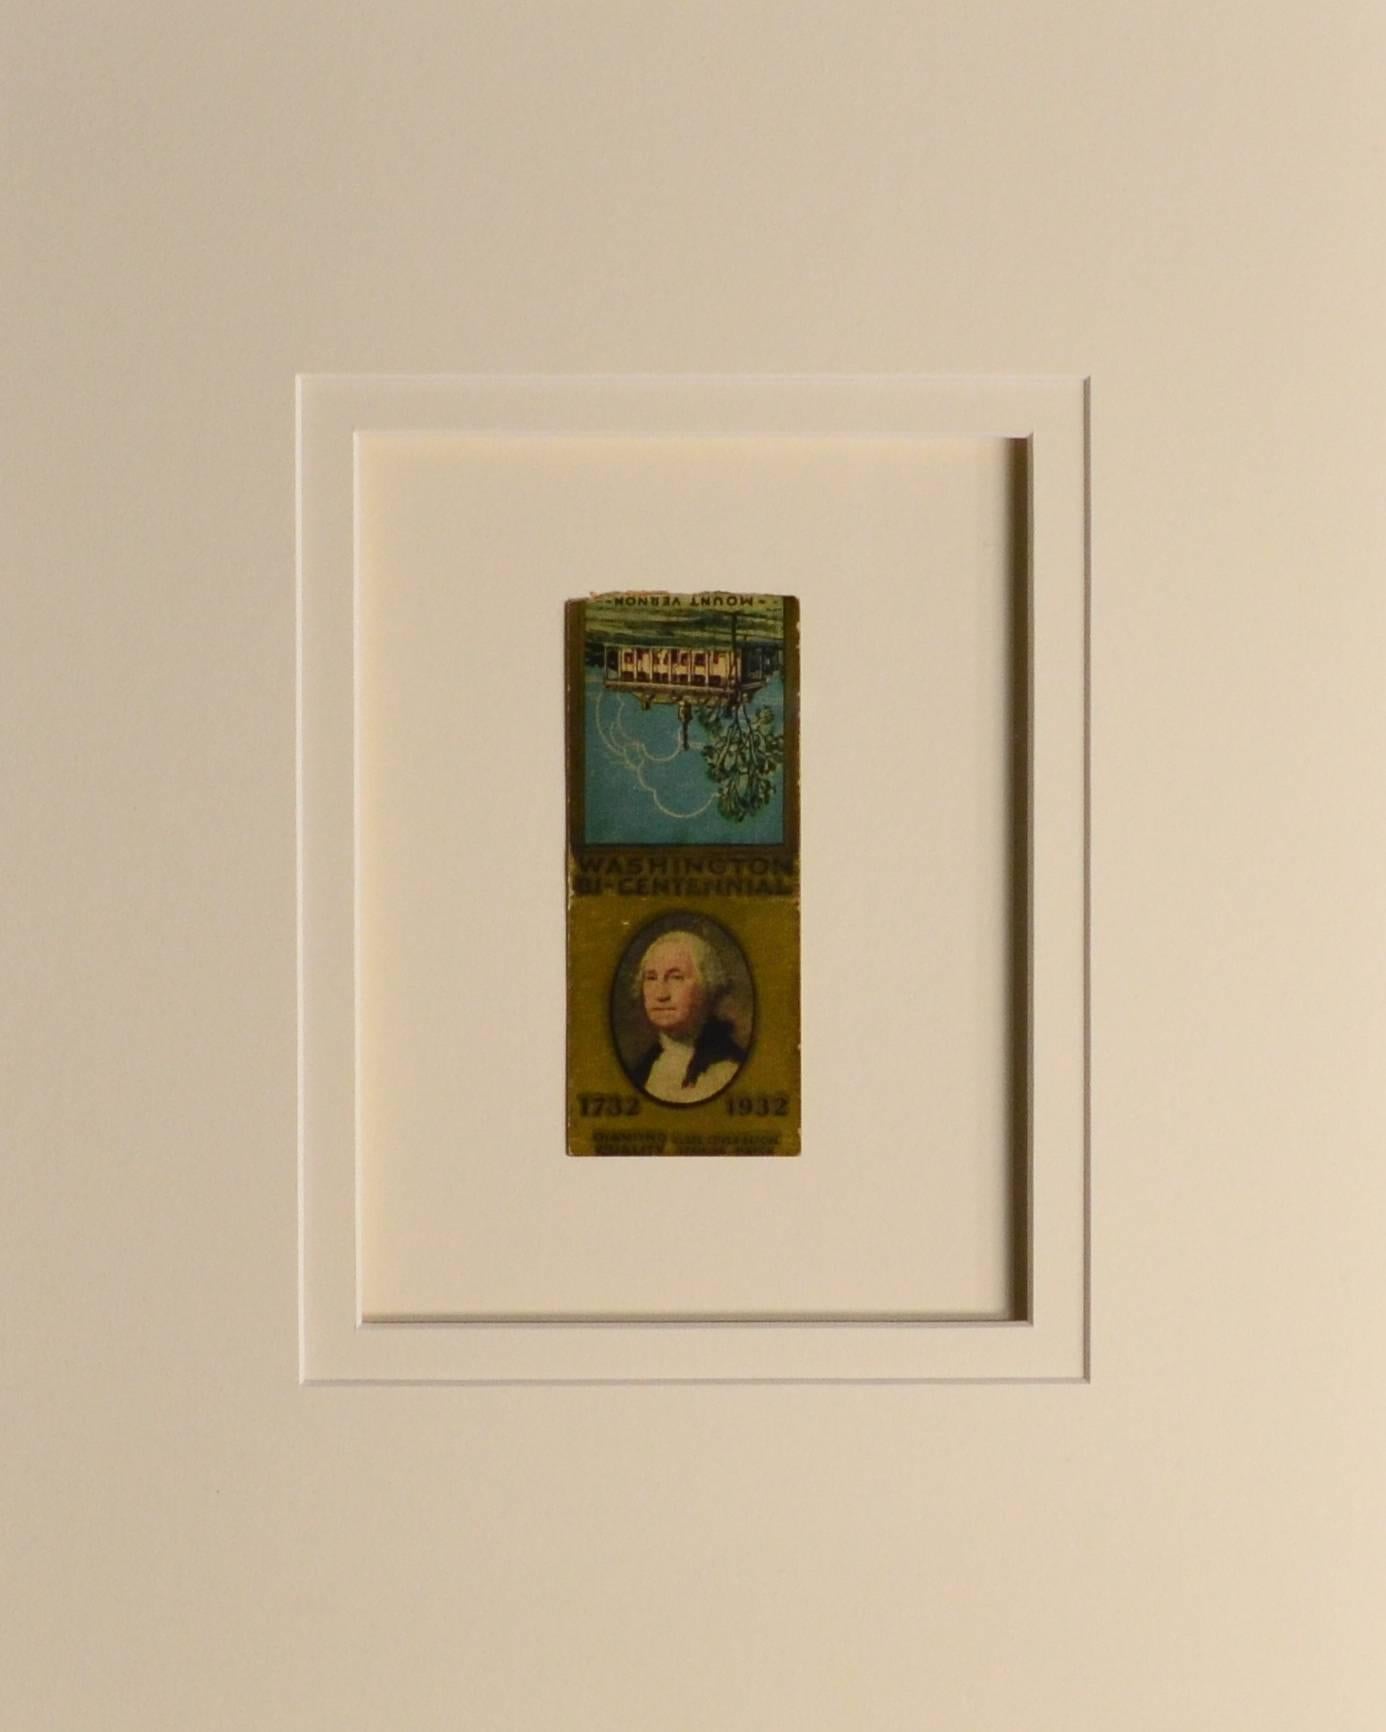 Great vintage chromolithograph book of matches from an event at Mount Vernon to celebrate the 200th birthday of our 1st President.
#12798
Museum framing with UV acrylic
Historical Americana